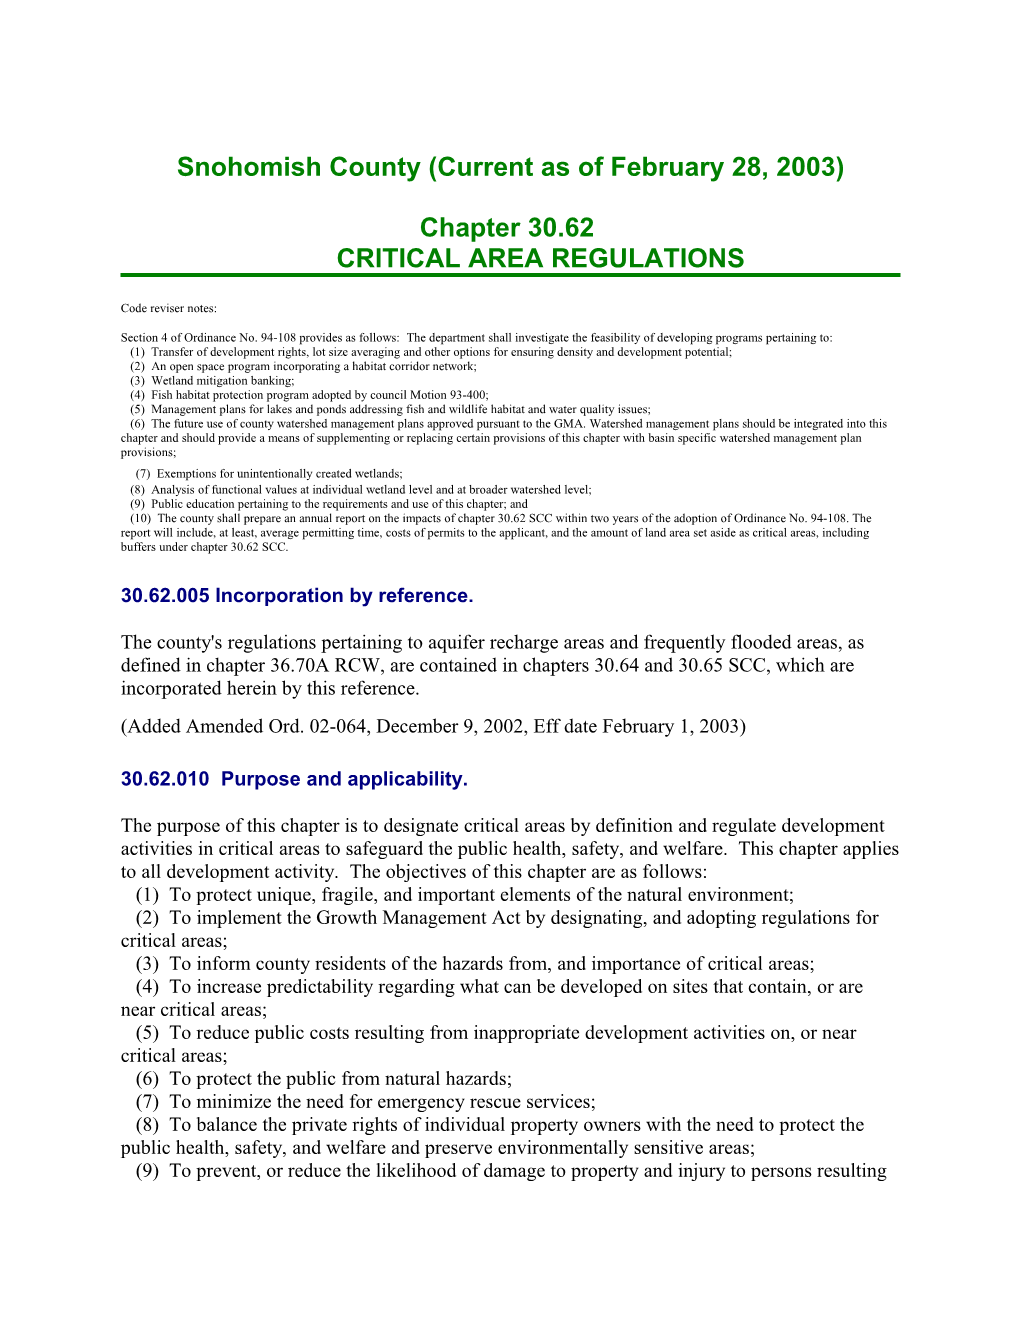 Snohomish County (Current As of February 28, 2003)